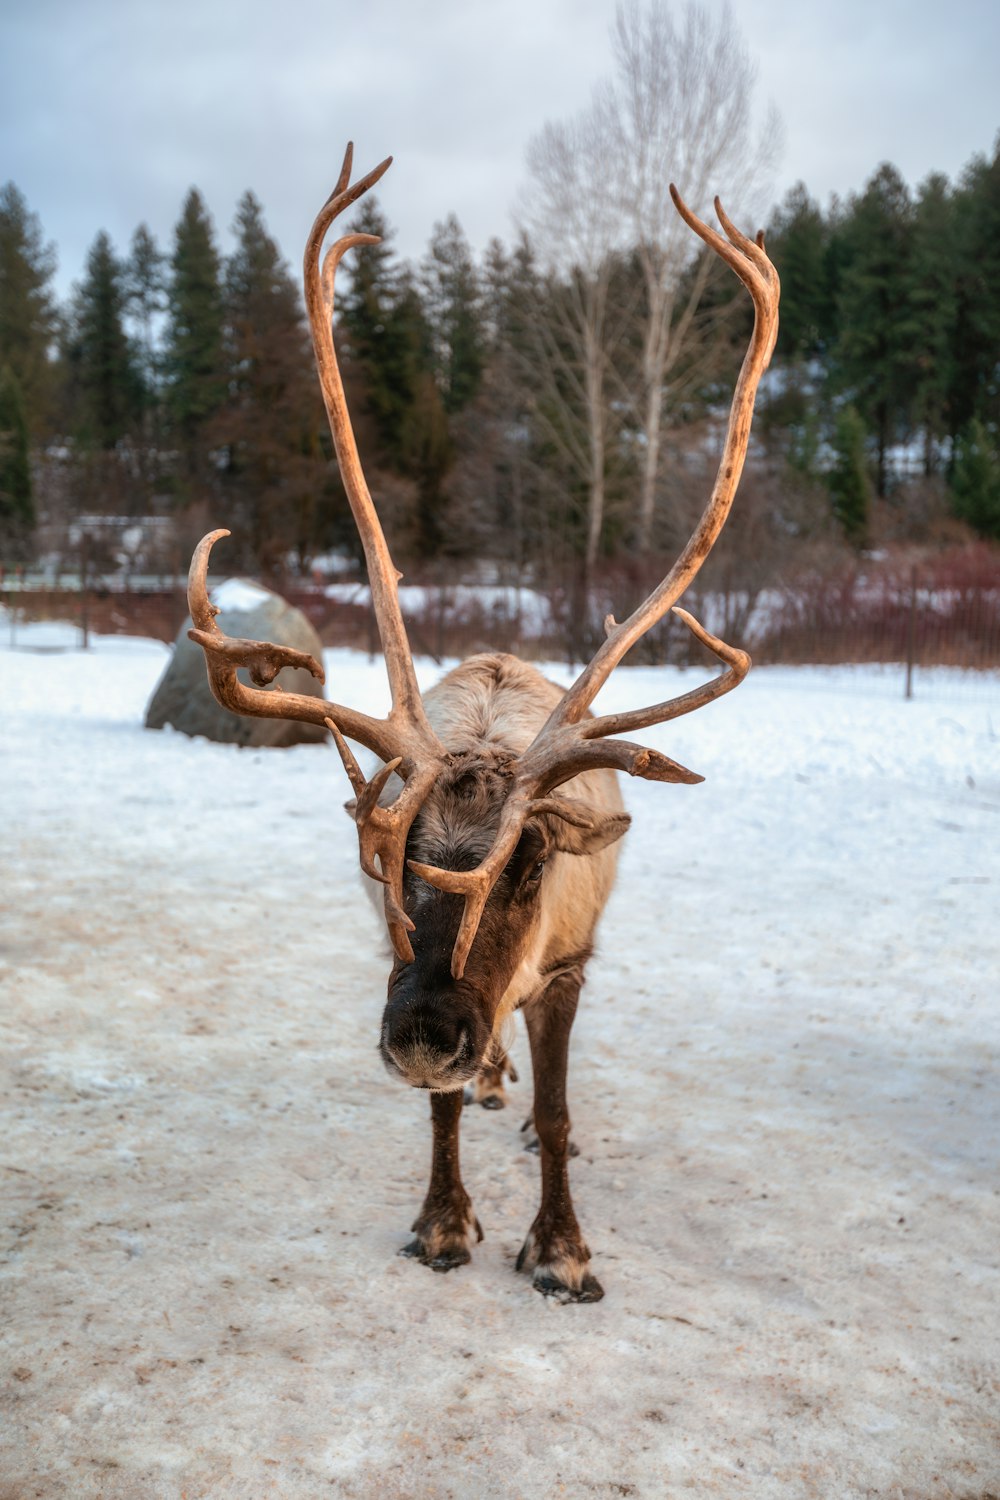 a reindeer with large antlers standing in the snow